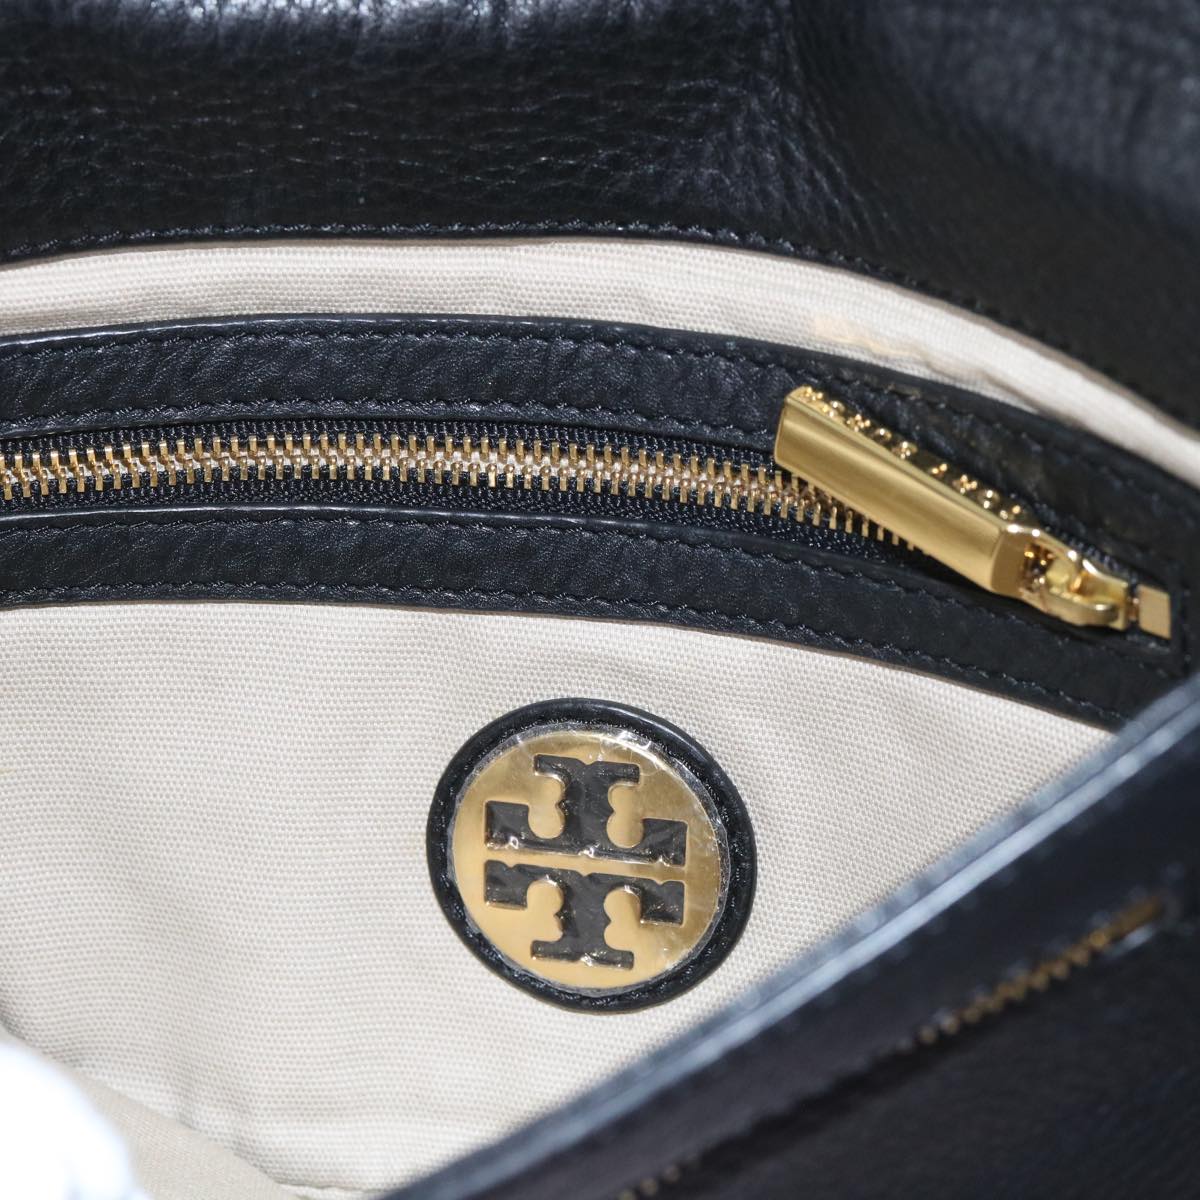 TORY BURCH Chain Shoulder Bag Leather Black Auth yk10231